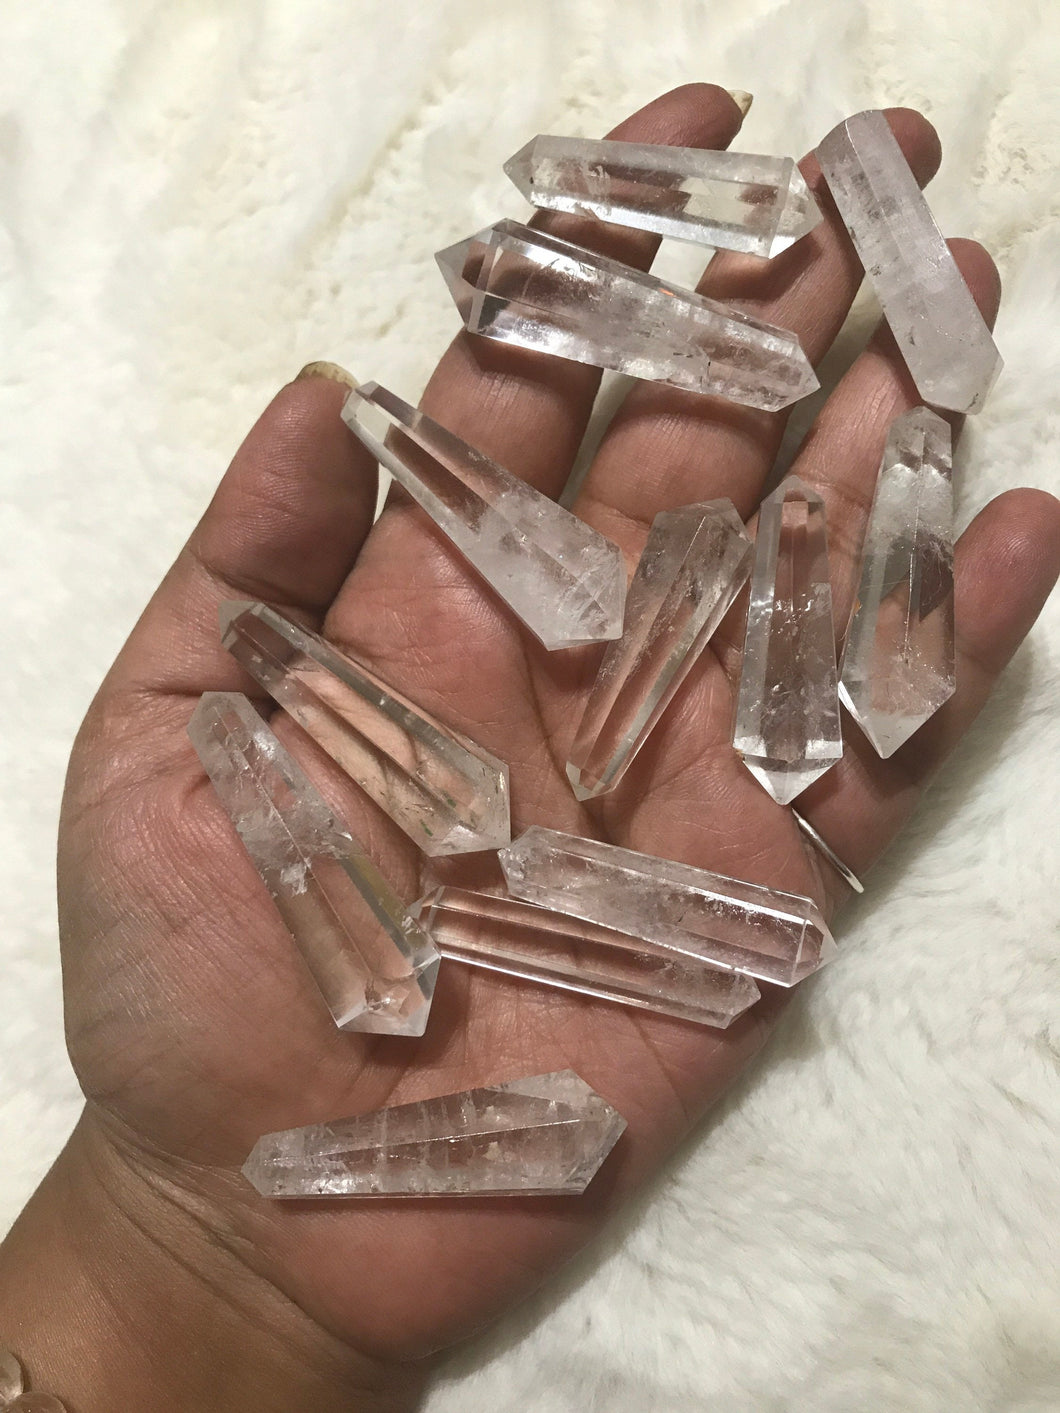 One Clear quartZ Double Terminated Point around 2 inches